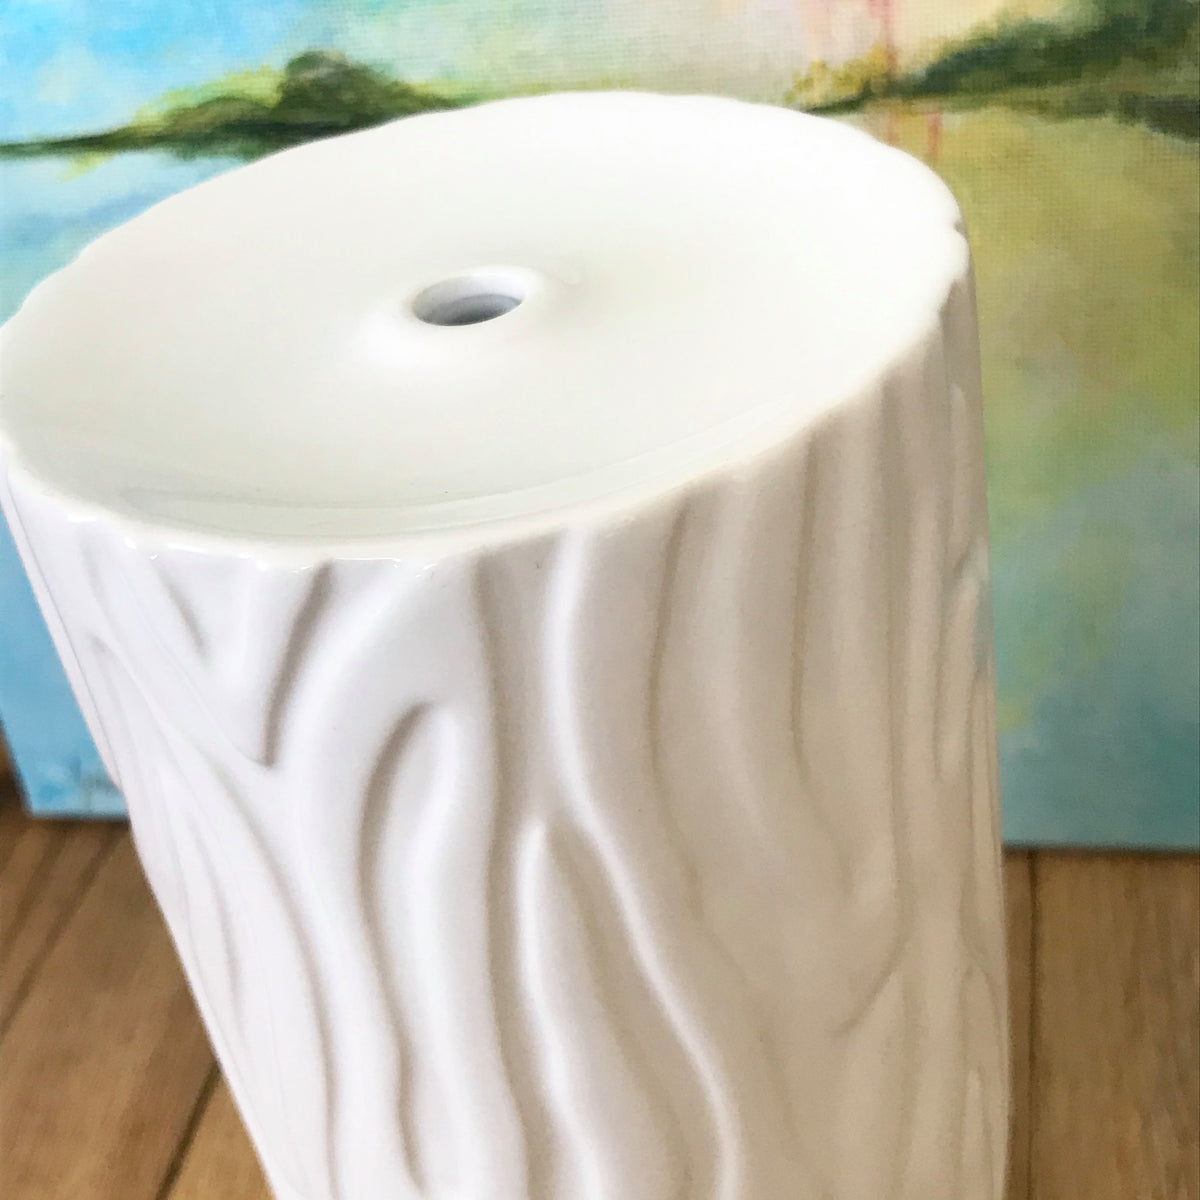 This clean and simple electric ceramic diffuser is perfect to diffuse essential oils in almost any room in your house or office! Features intermittent or continuous diffusion control, color changing light, and auto shut off features.